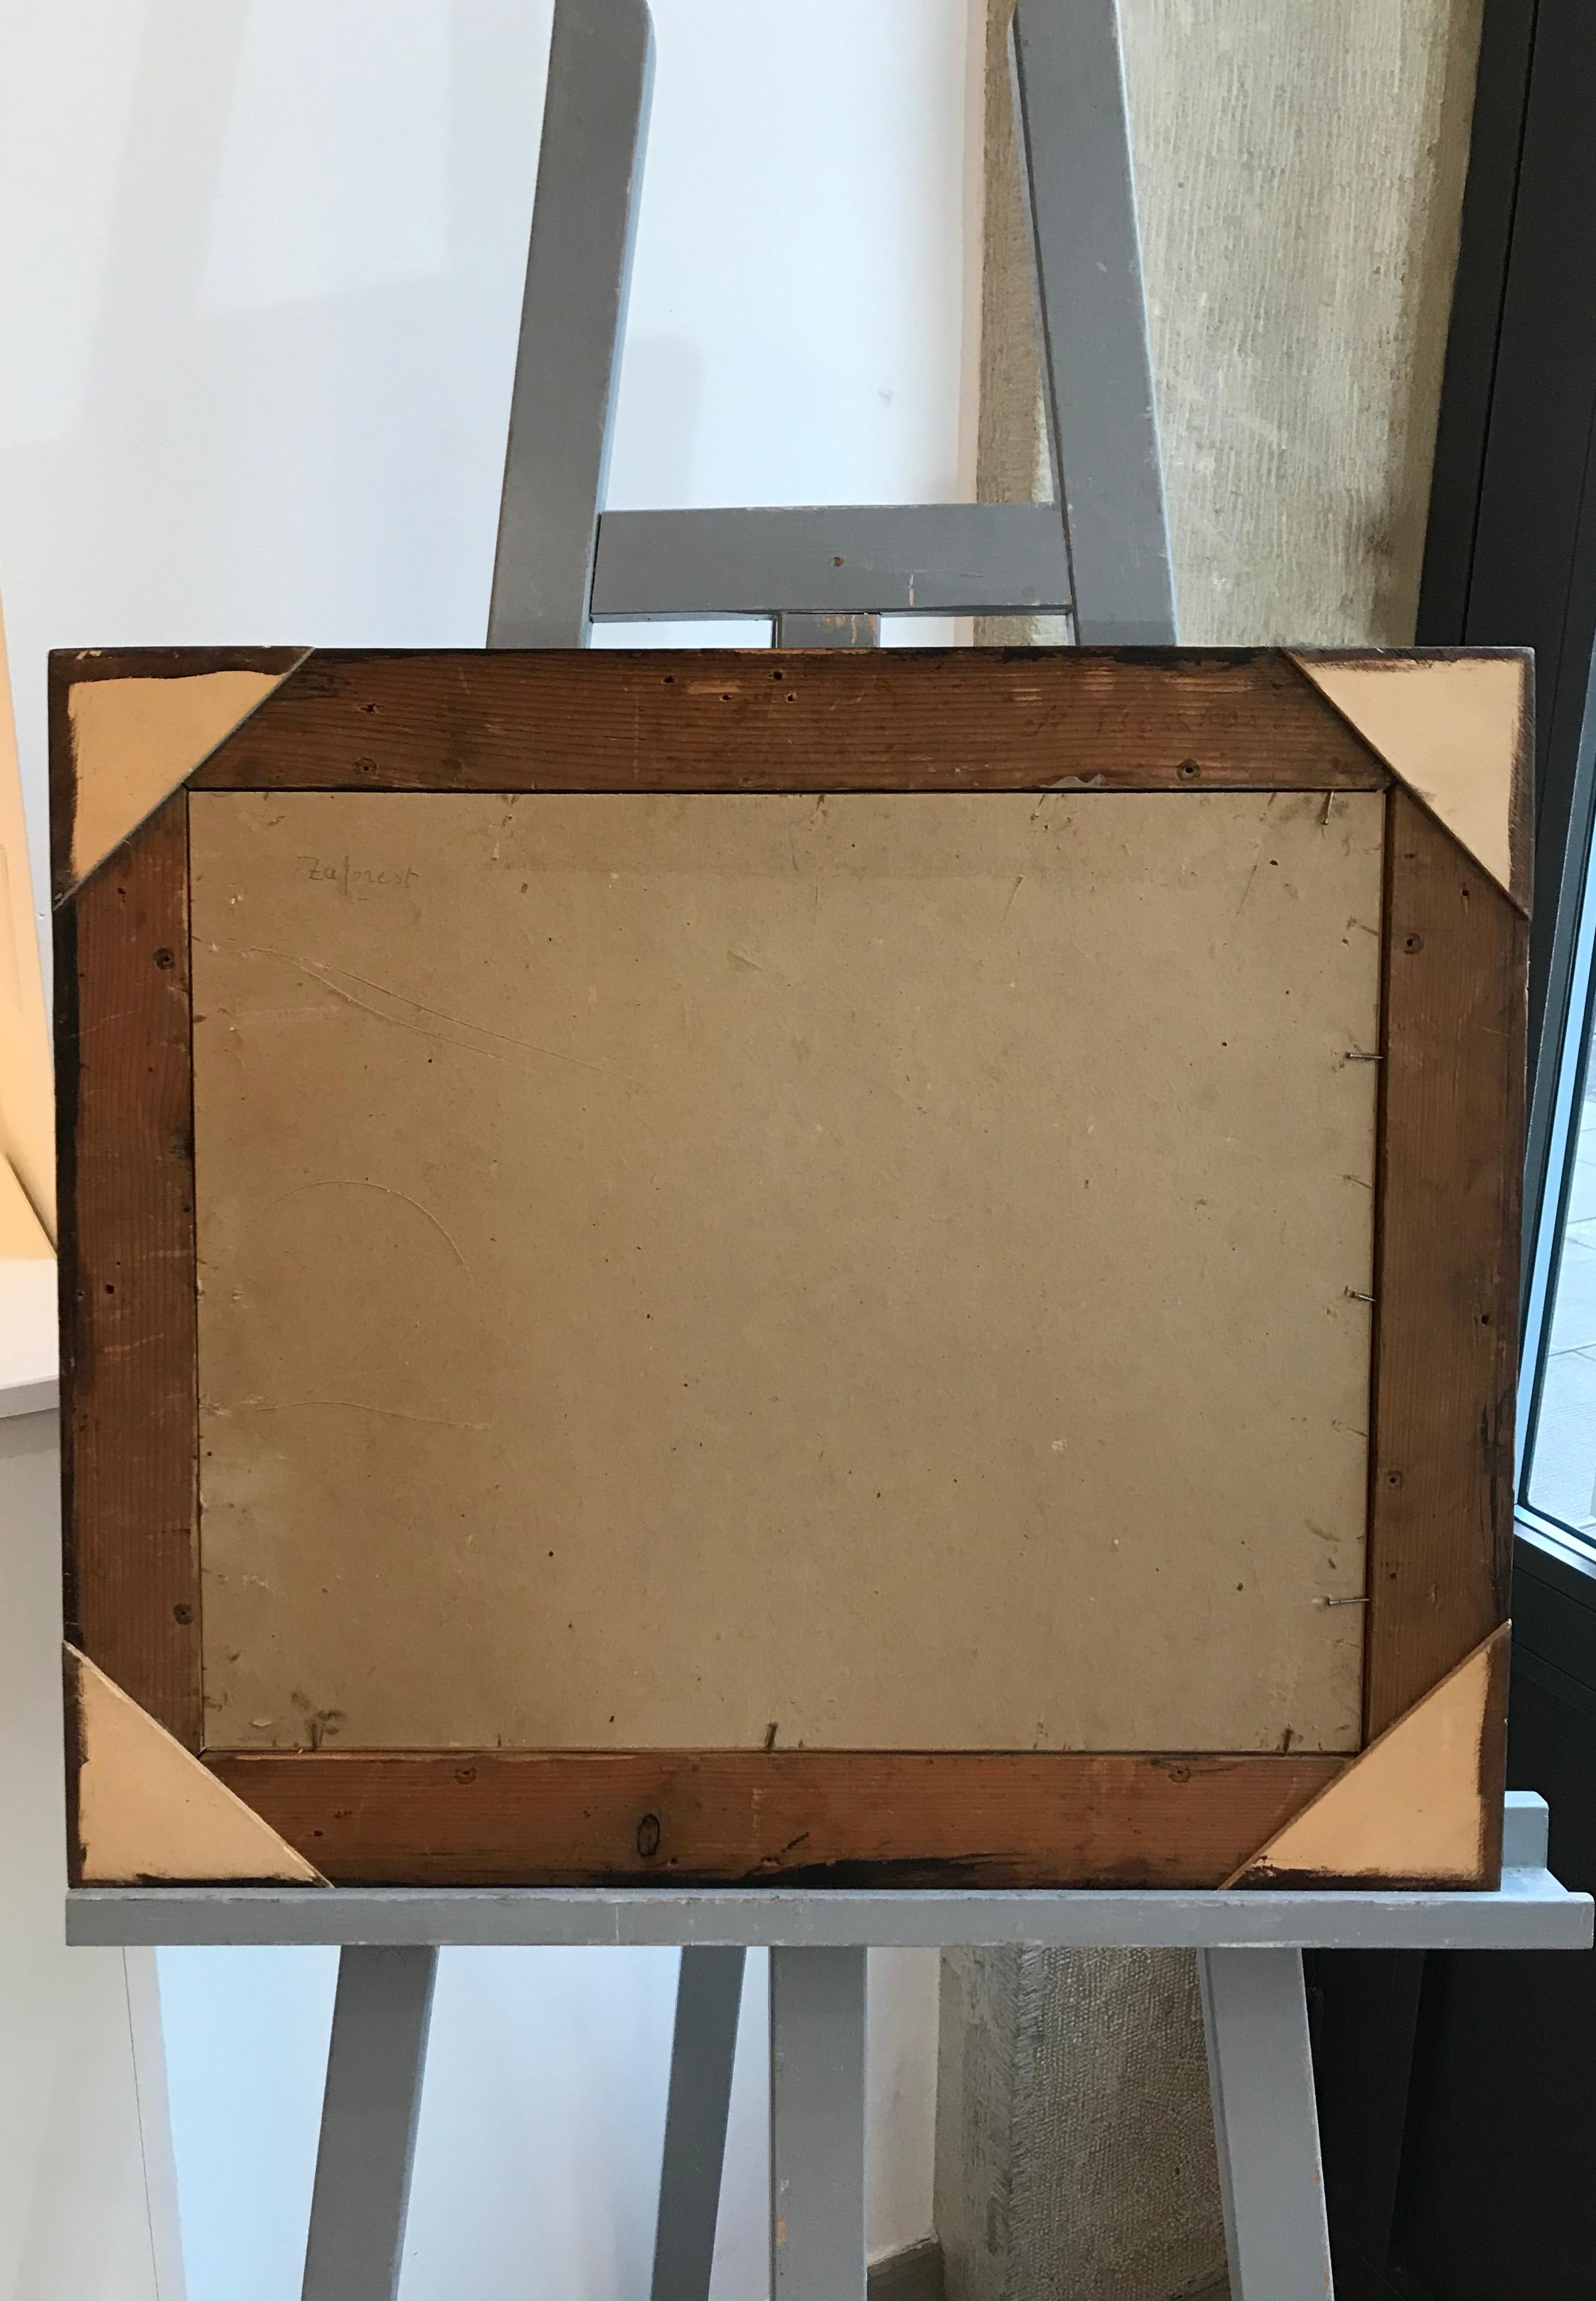 Signed on the back Zaforest

Work on paper
Brown wooden frame with glass pane
47,7 x 55,6 x 2,5 cm